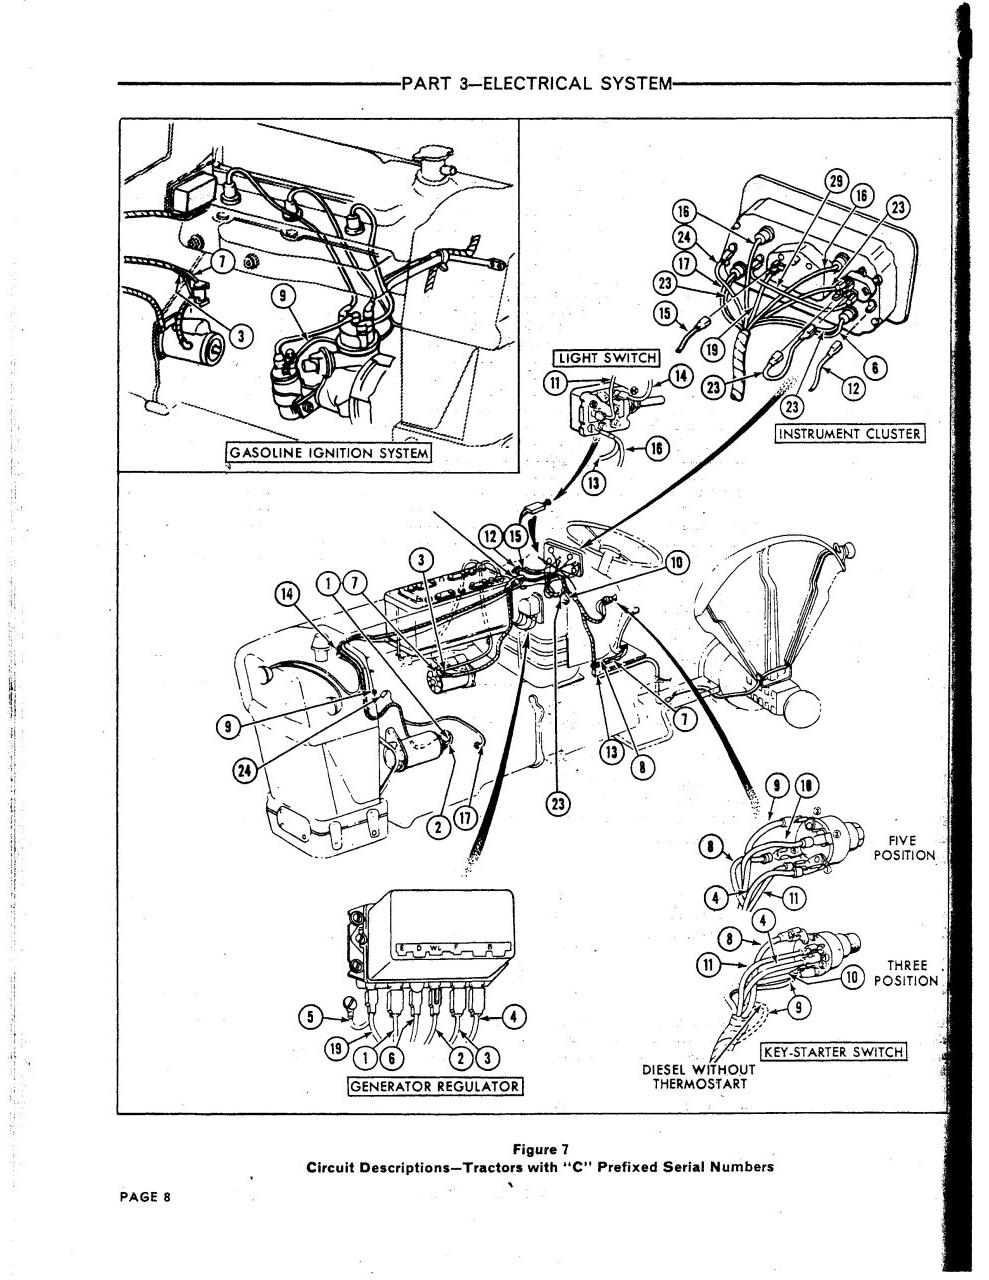 1963 Ford 2000 tractor wiring diagram #3